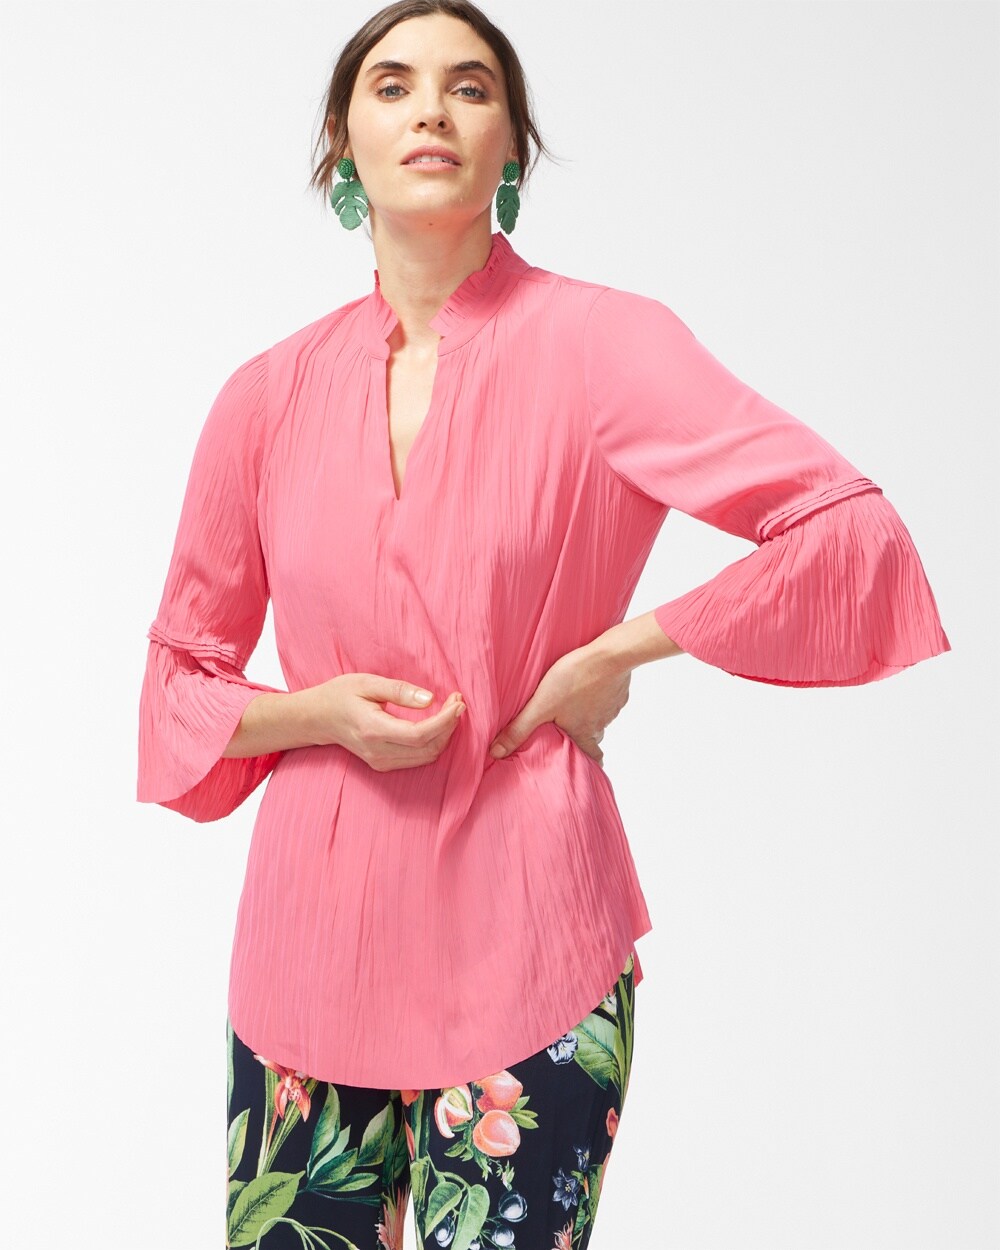 Pleated Flare Sleeve Blouse video preview image, click to start video